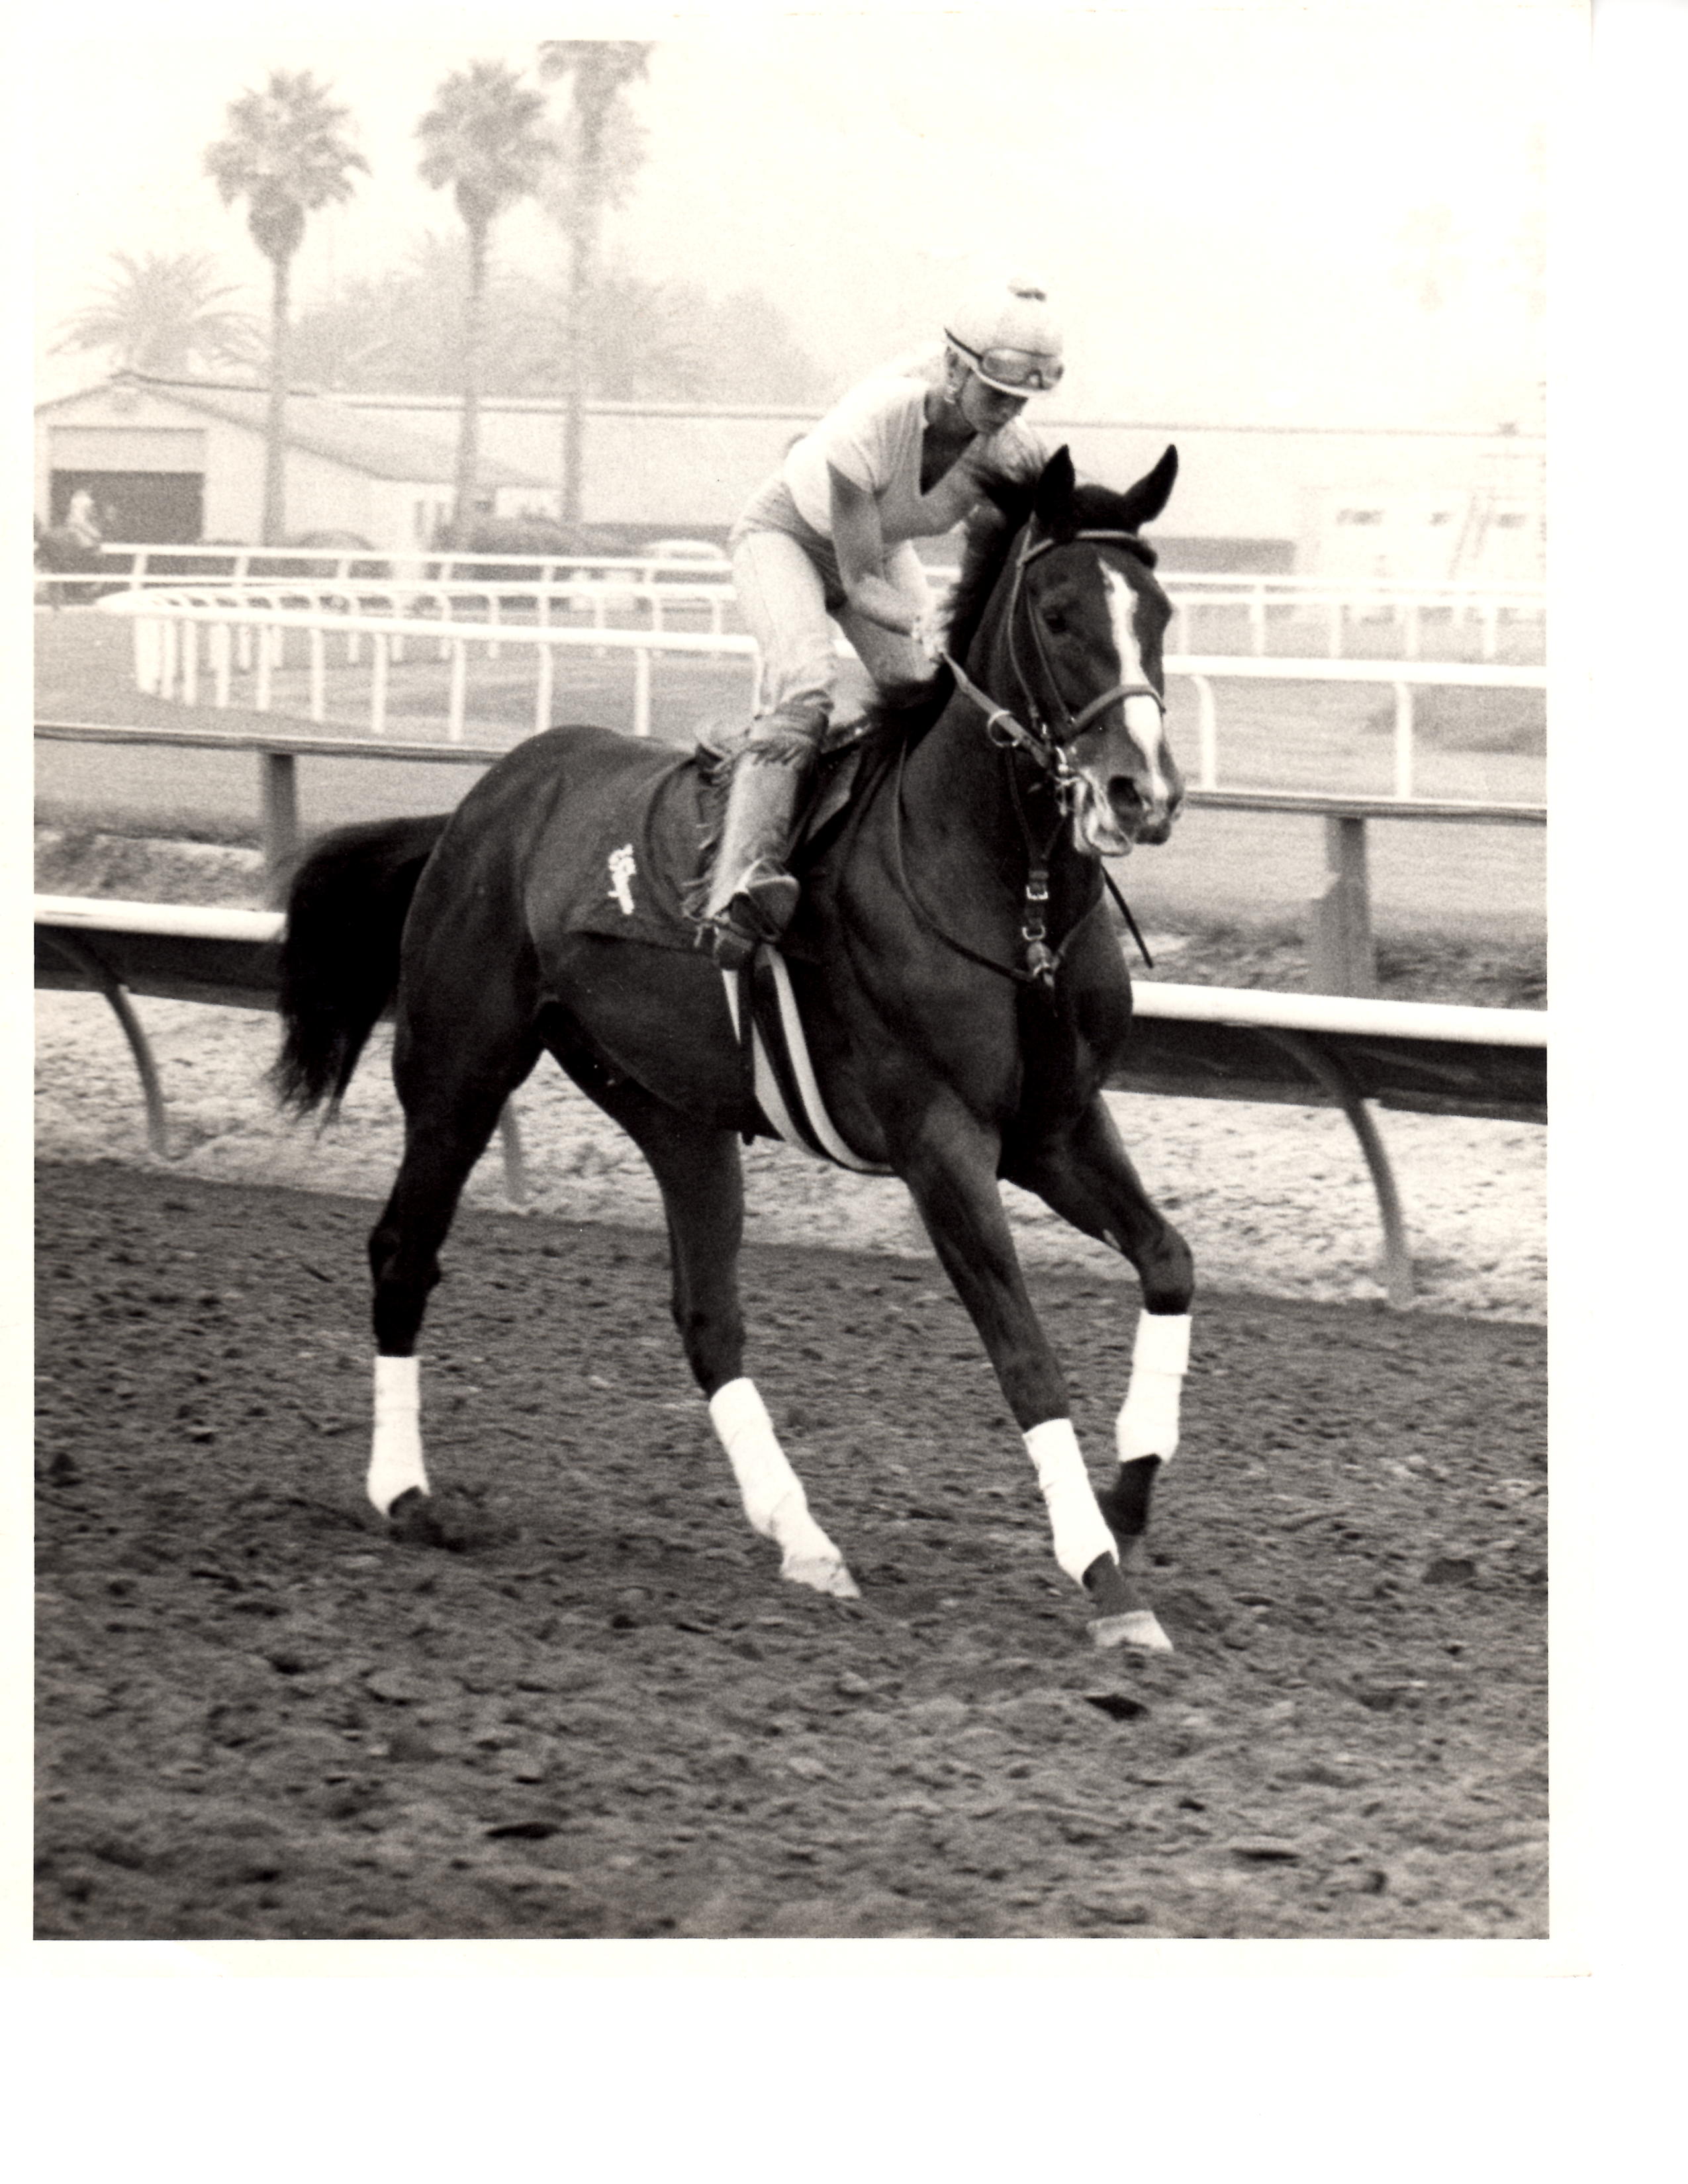 I used to train and exercise thoroughbred race horses at Santa Anita, Hollywood Park, and Del Mar!